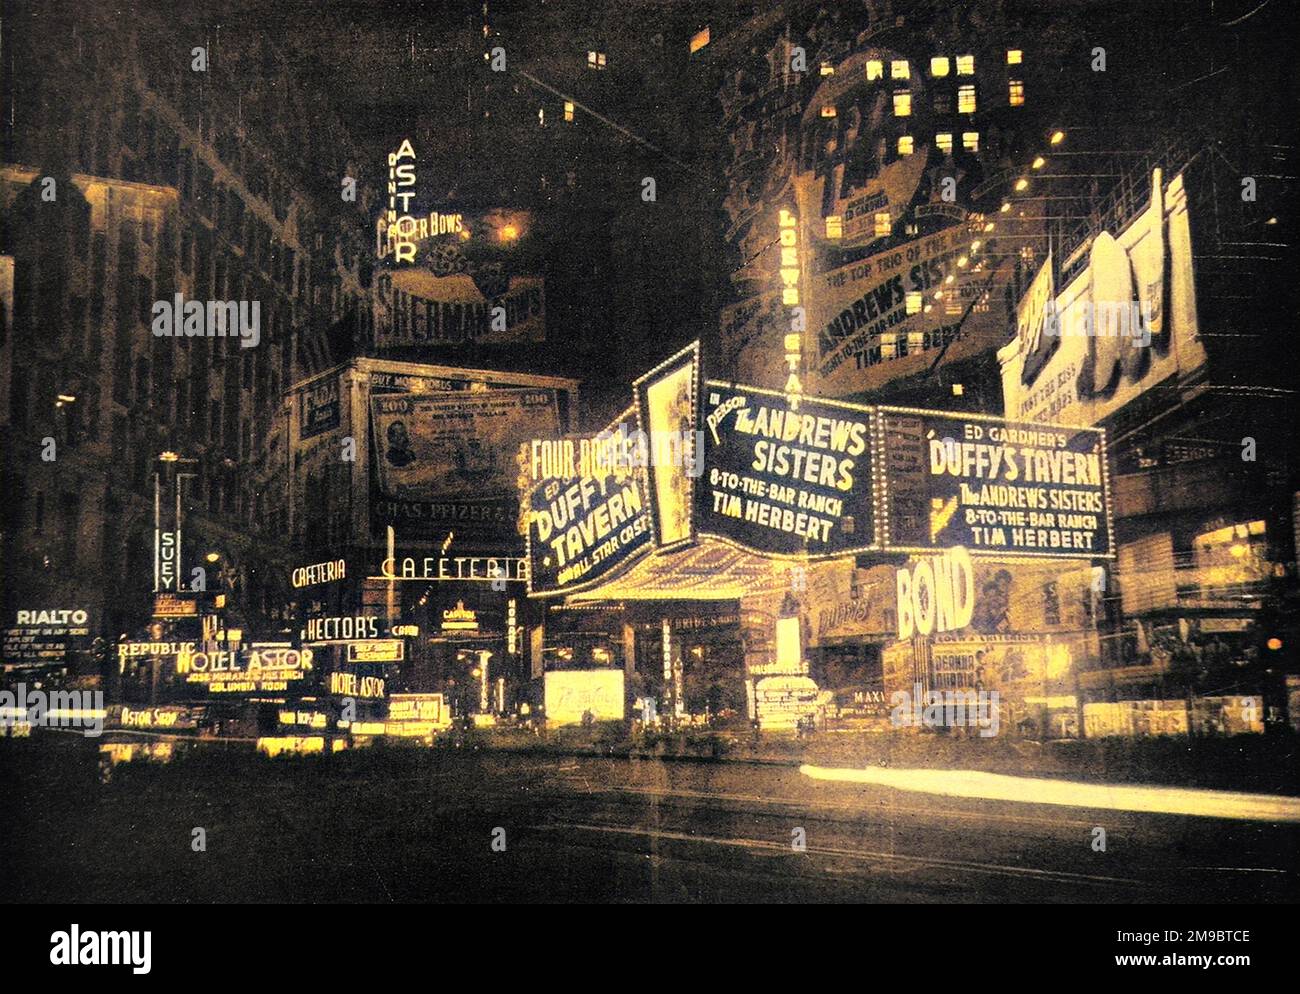 Photograph showing the lights of Broadway, New York, at night in 1945. After war-time austerity, these lights signalled an up-swing in American recreation.  This photograph is a double-exposure (or more) with several views of the Broadway superimposed and printed as one picture. Stock Photo